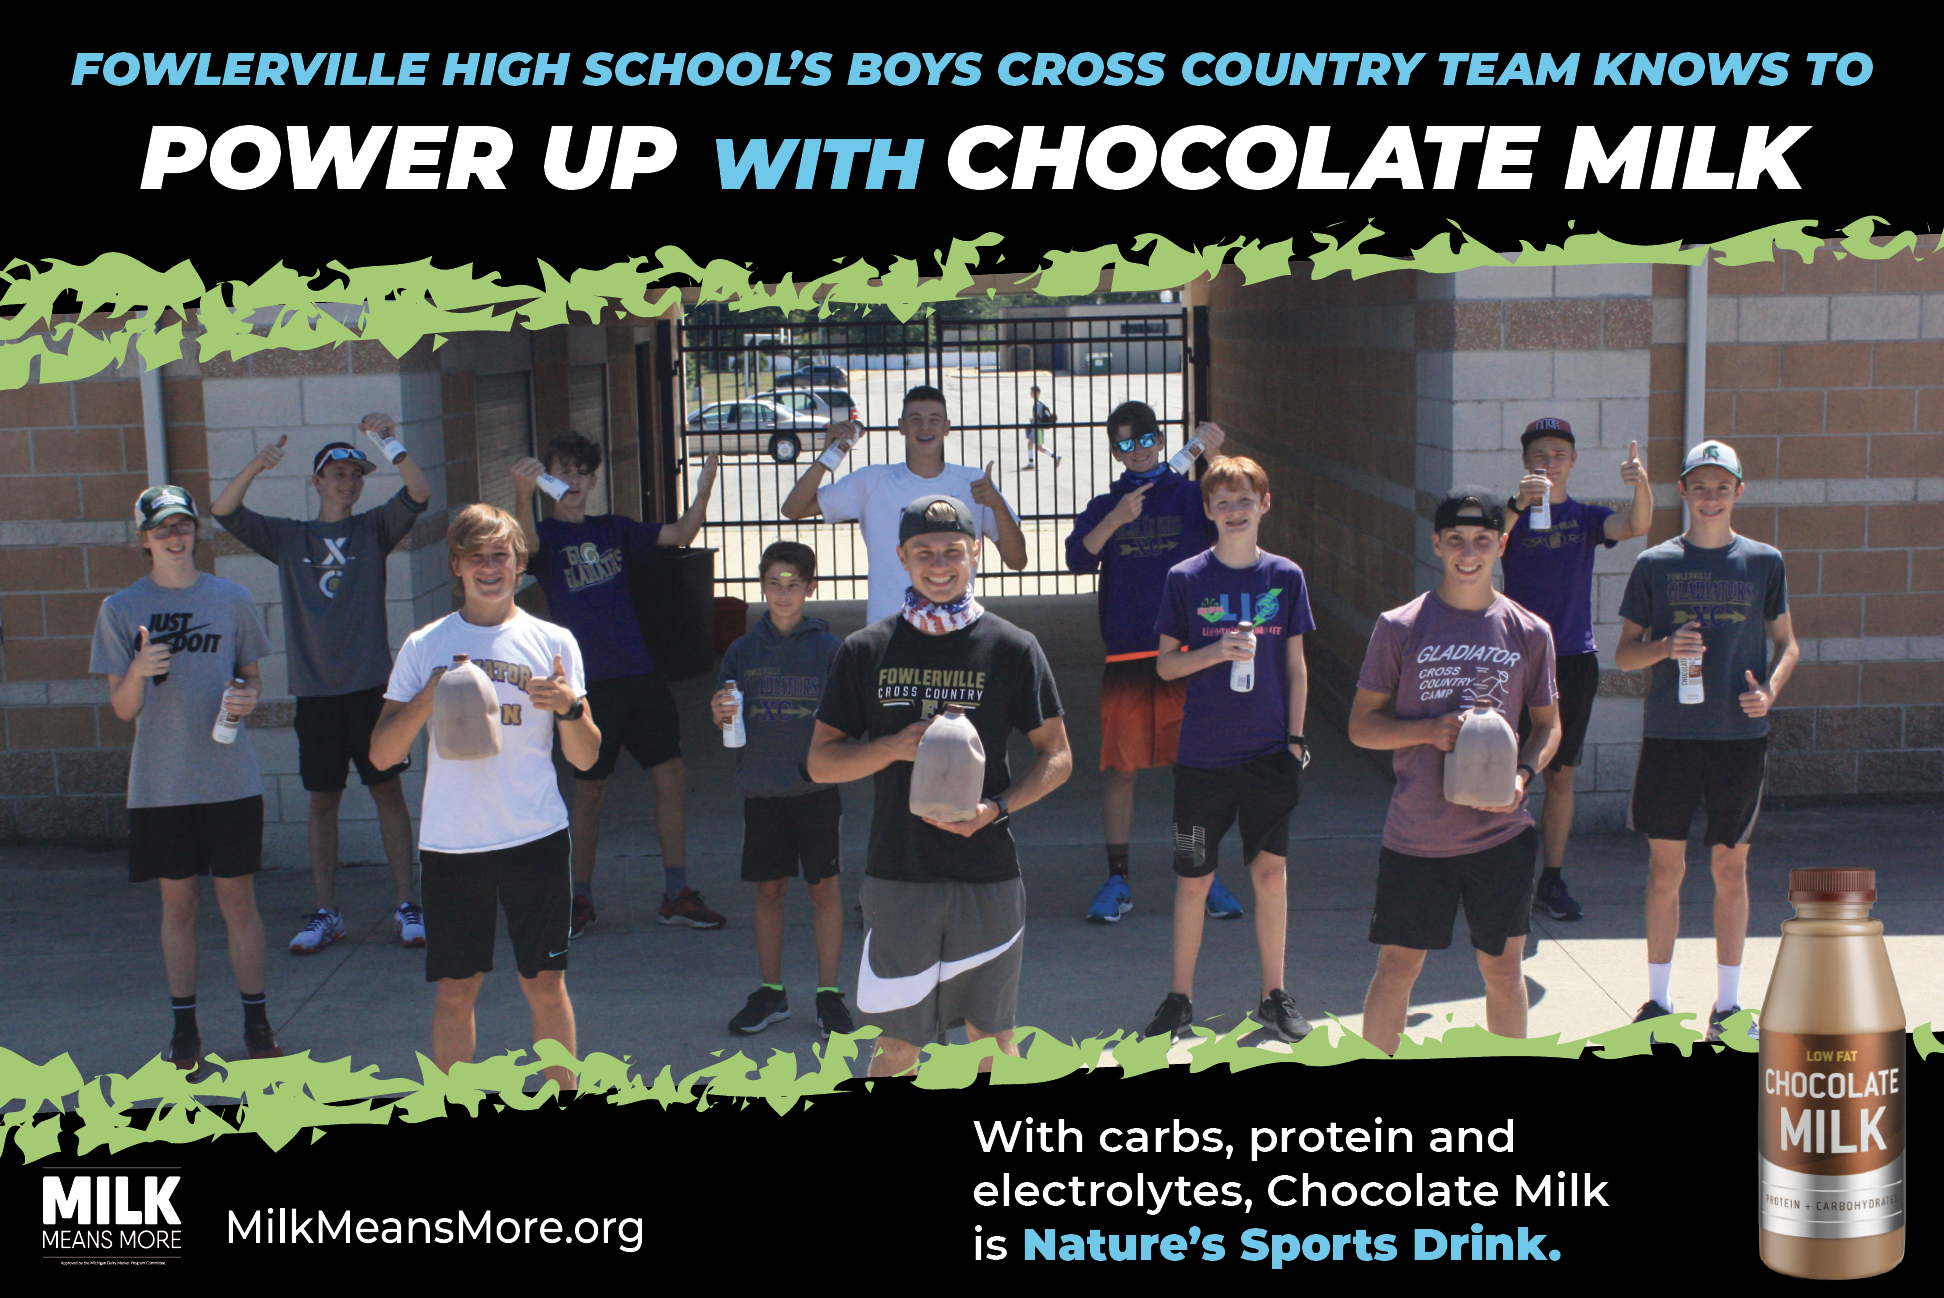 Chocolate Milk Power Up Flyer - Fowlerville Cross Country